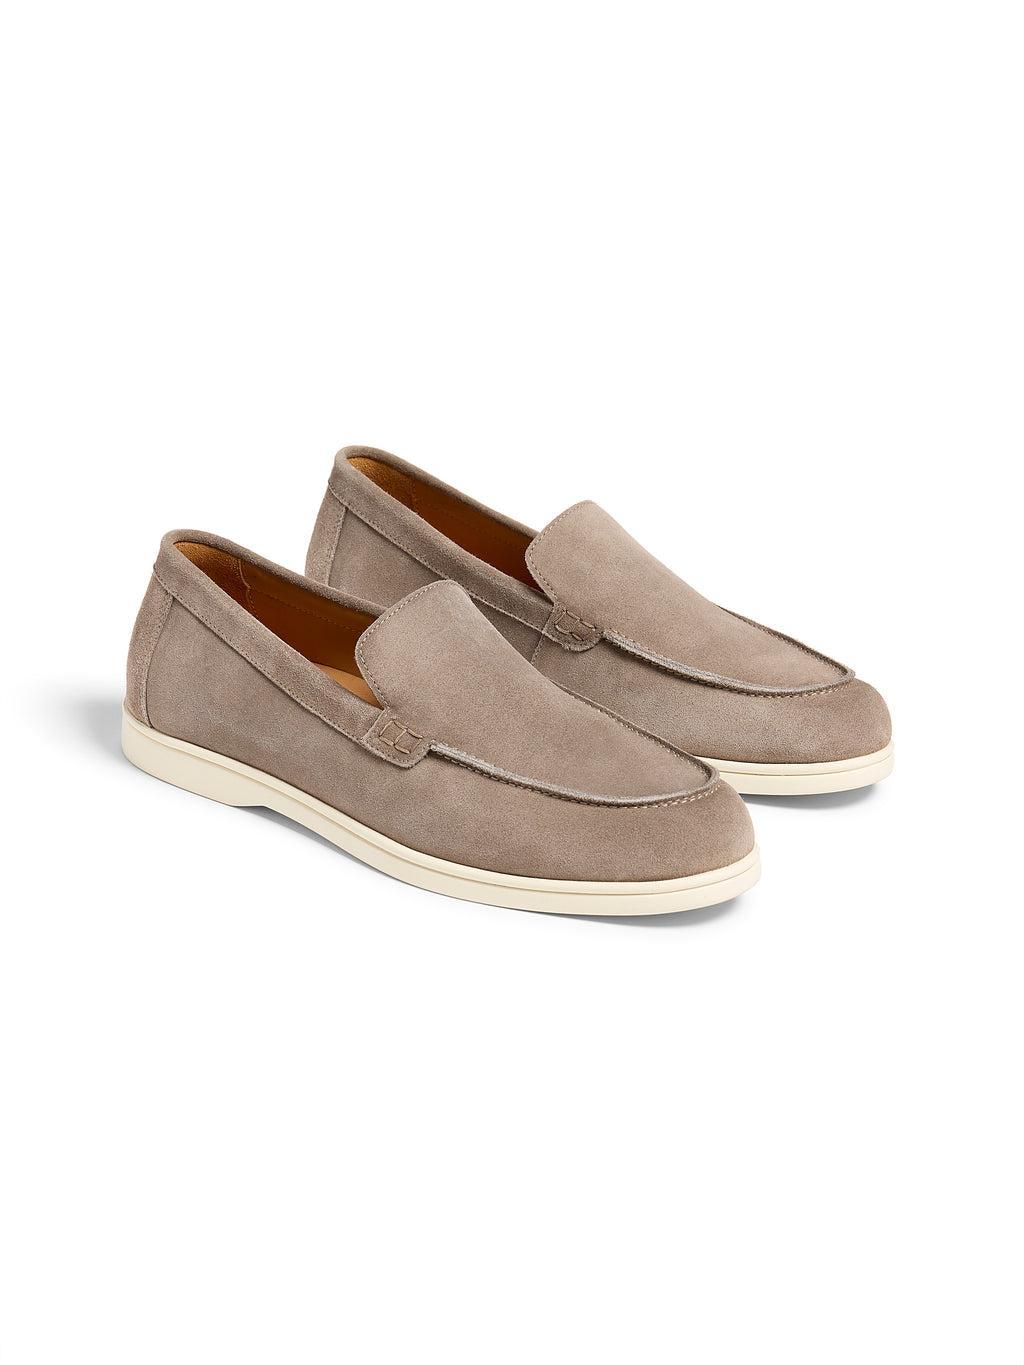 Reserve Venetian Loafer - Smoke Product Image